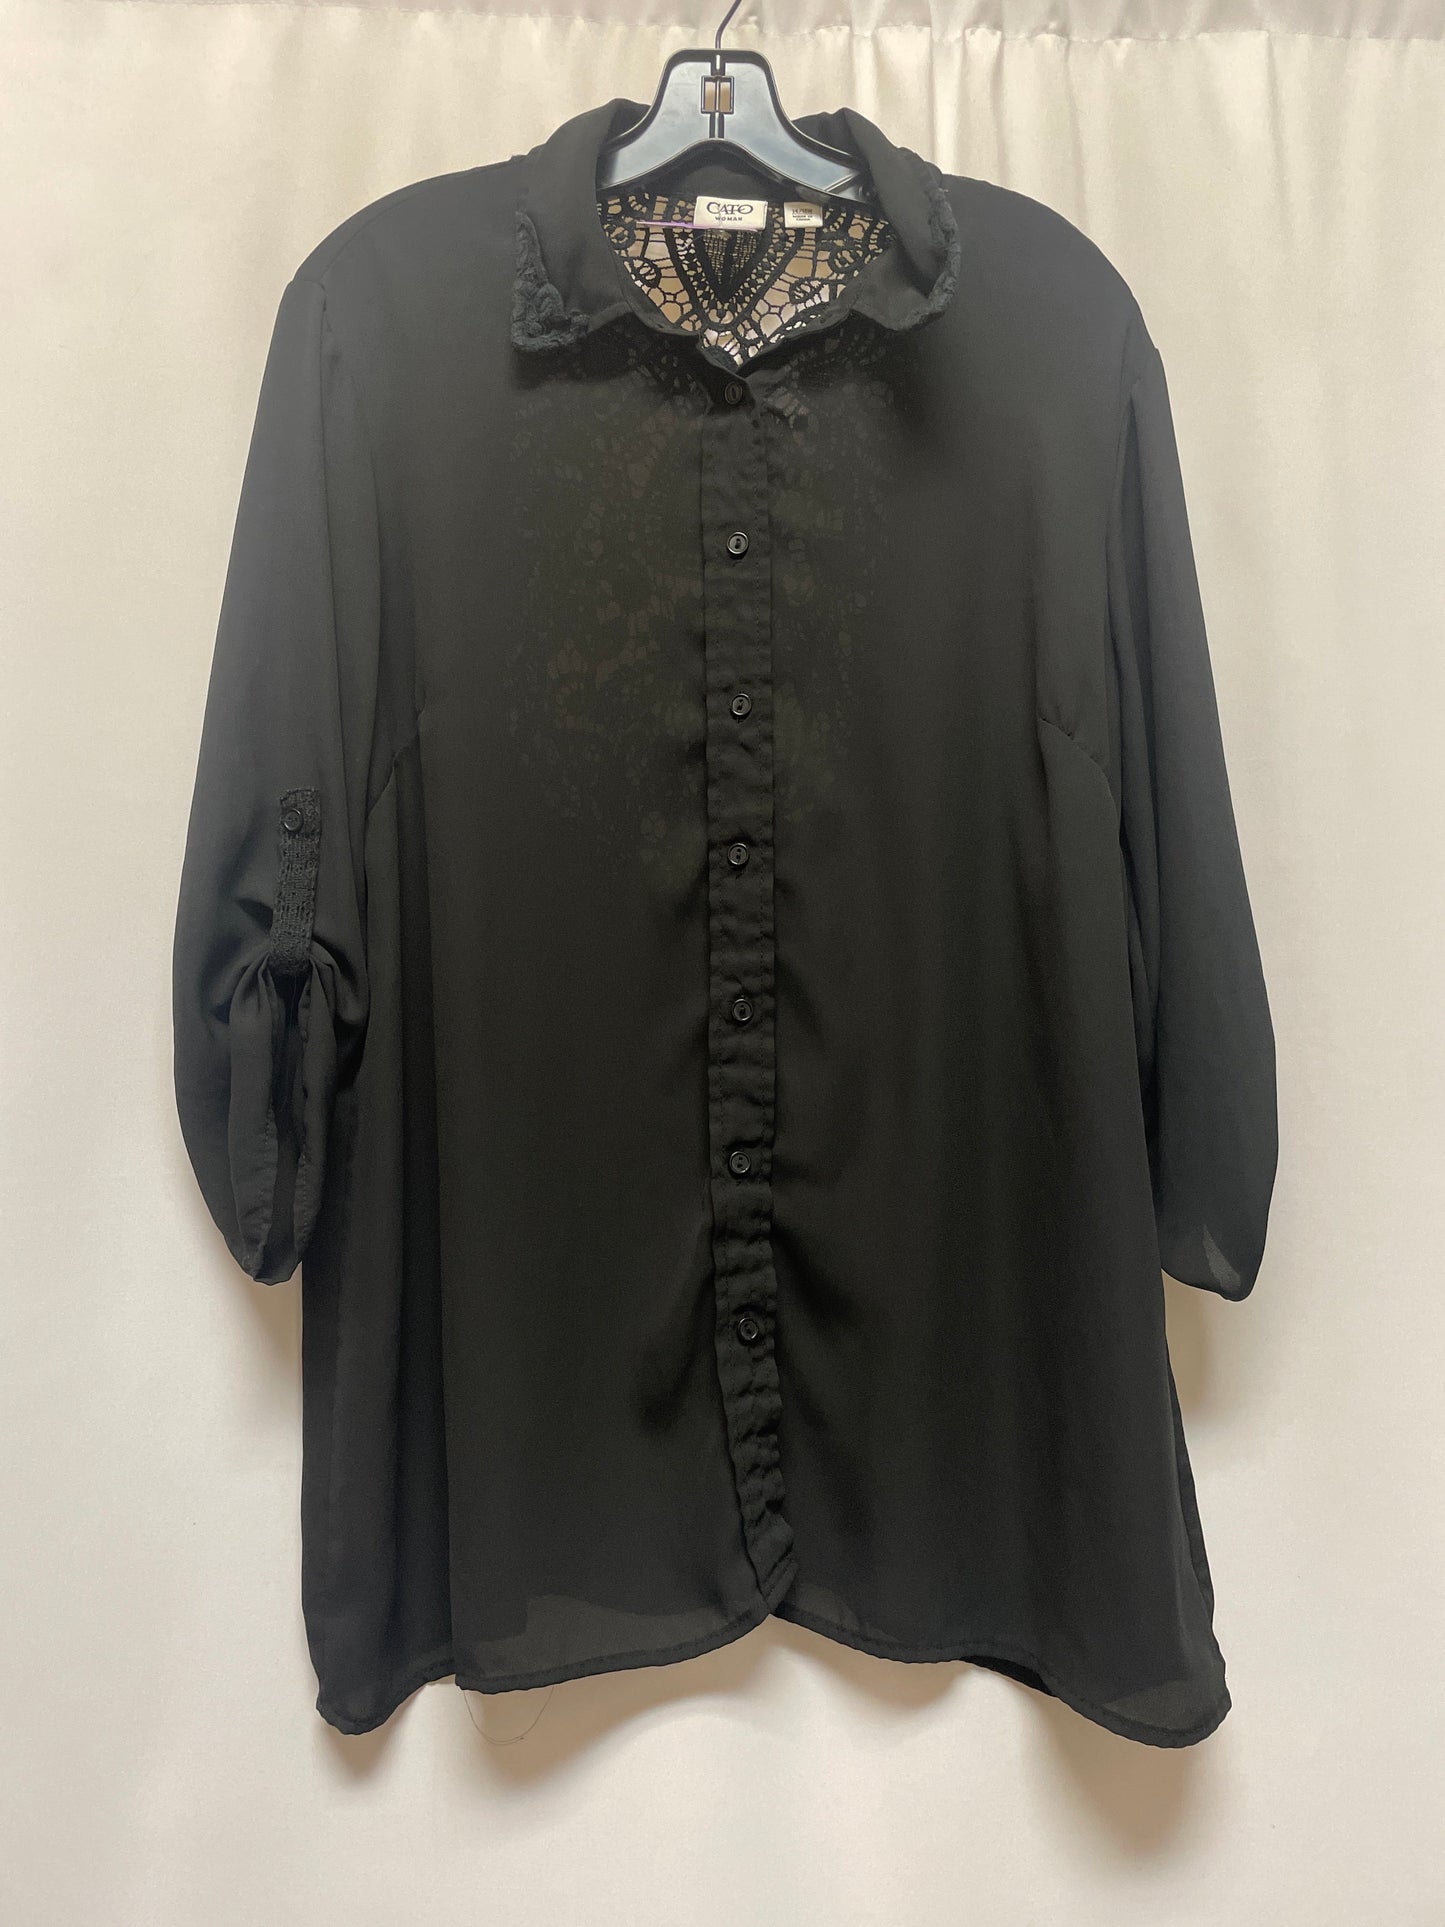 Black Top Long Sleeve Cato, Size Xl